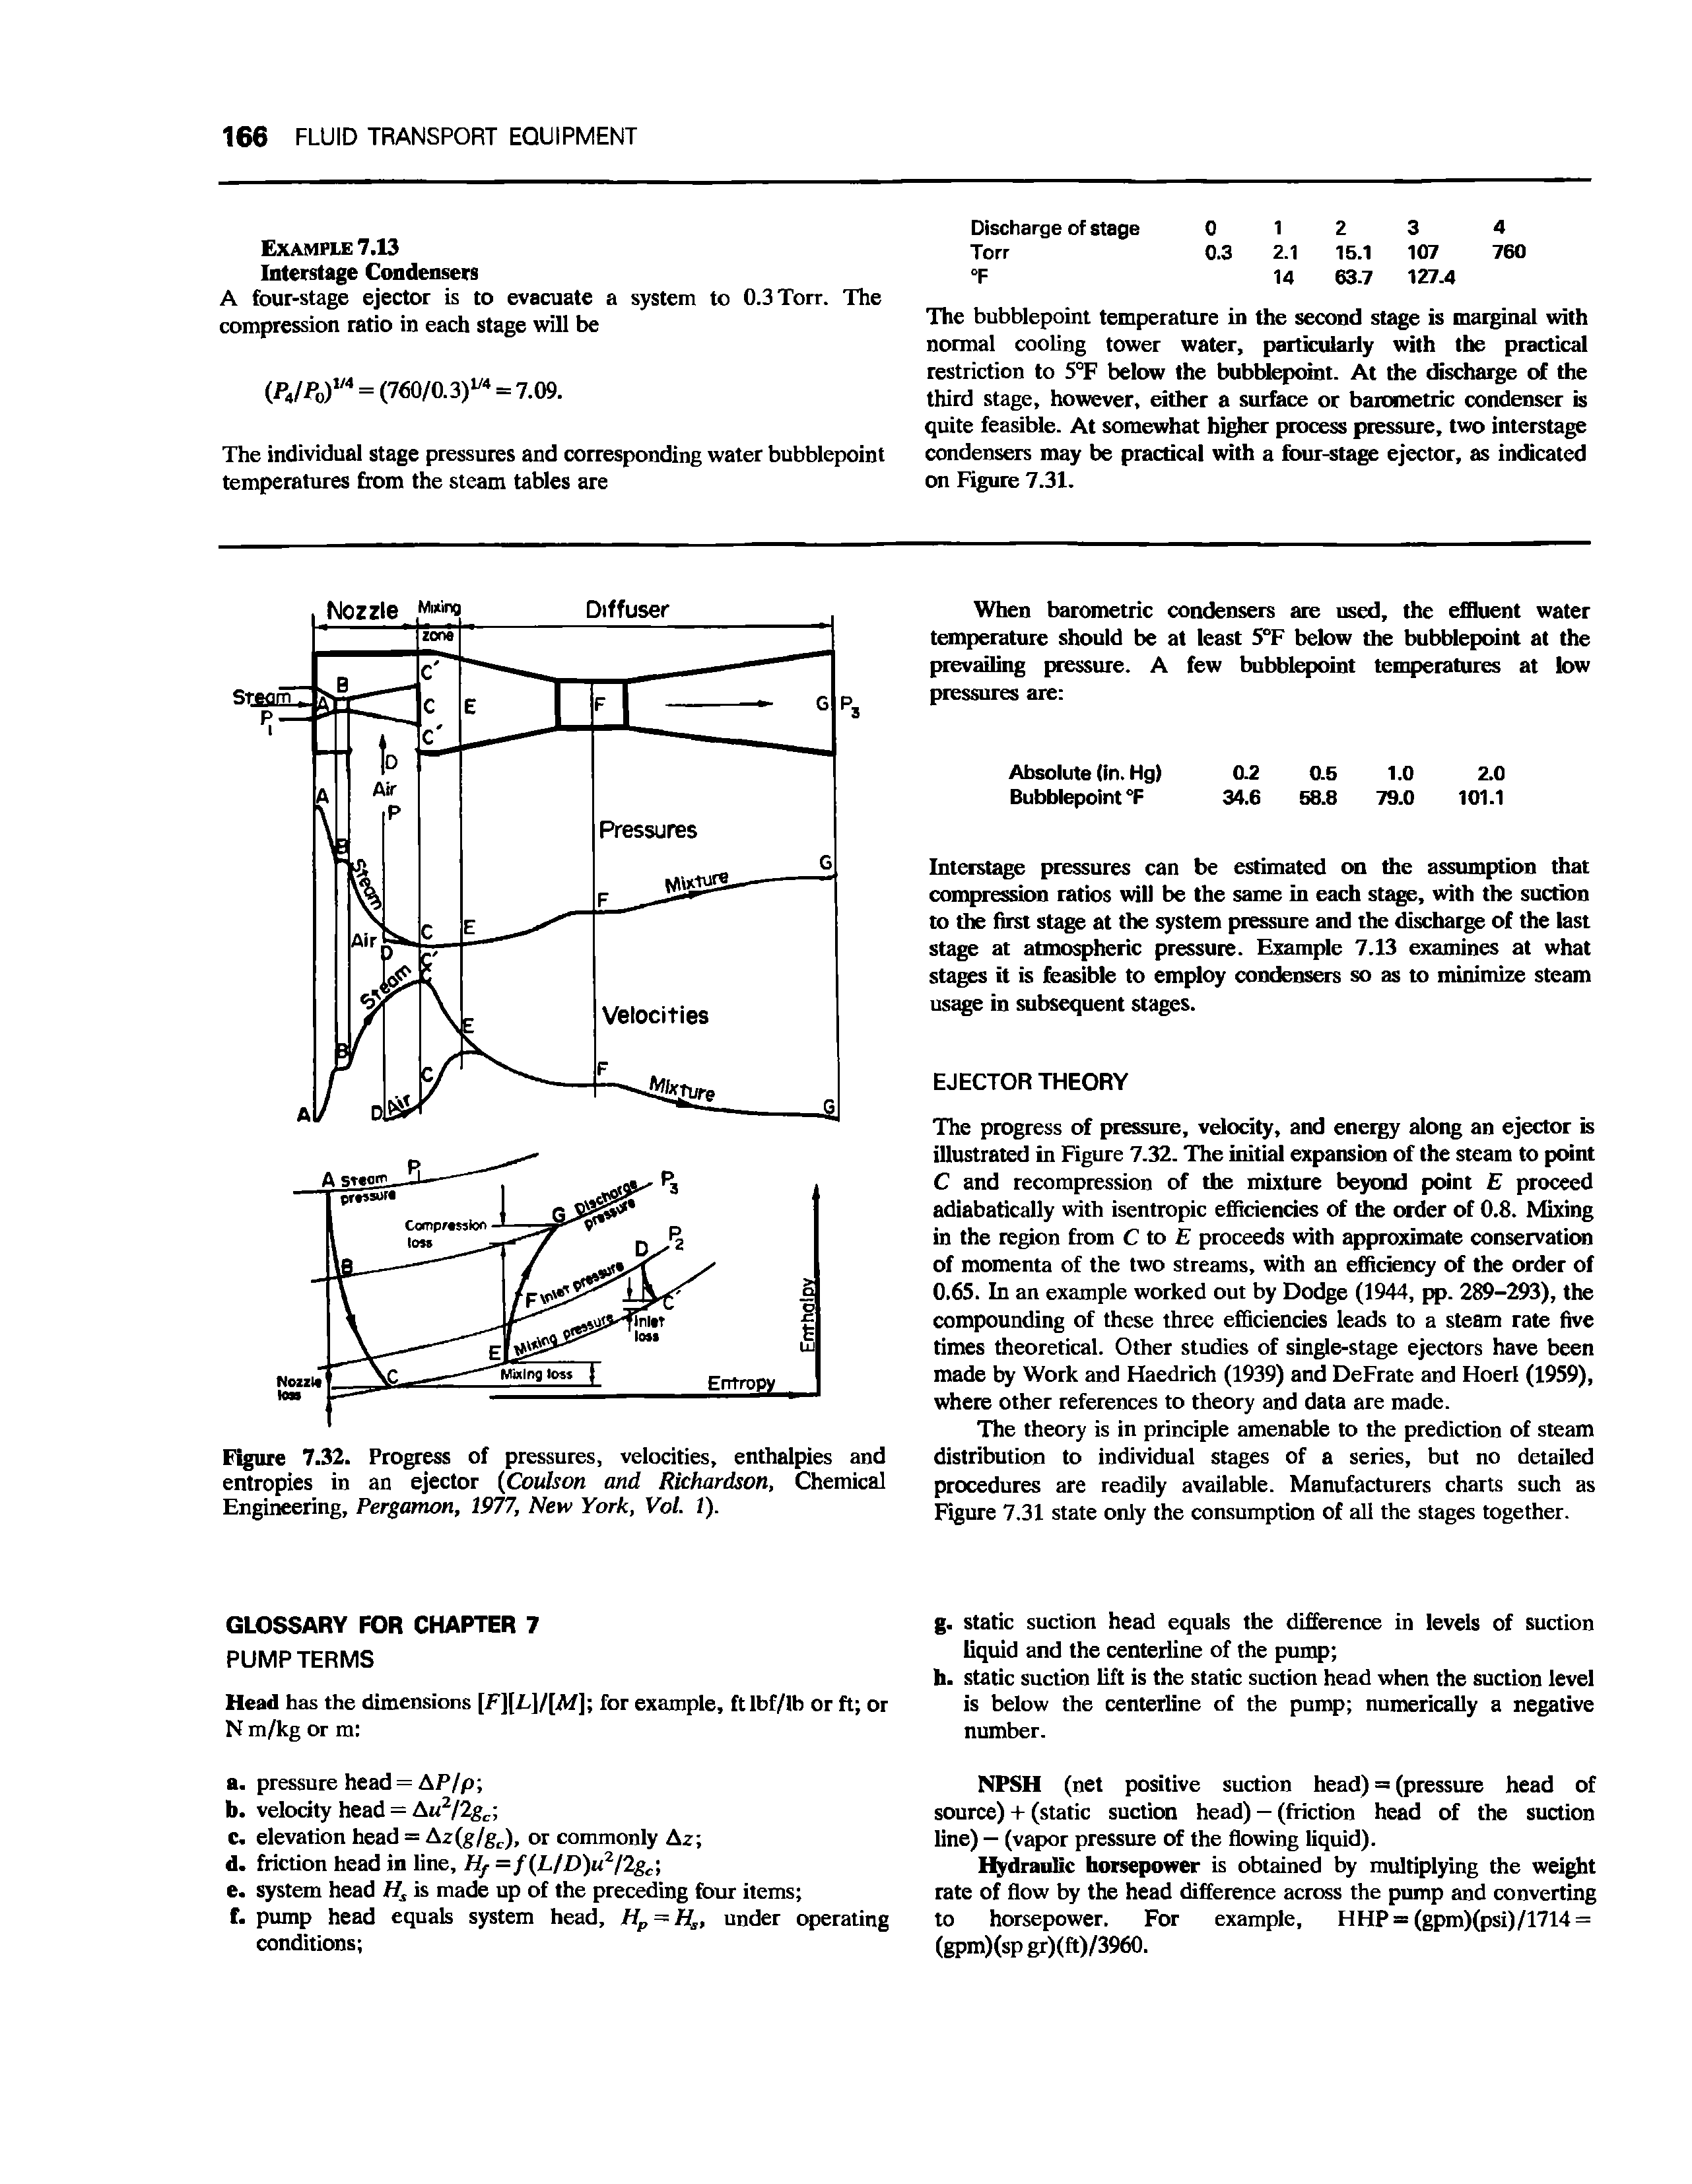 Figure 7.32. Progress of pressures, velocities, enthalpies and entropies in an ejector (Coulson and Richardson, Chemical Engineering, Pergamon, 1977, New York, Vol. 1).